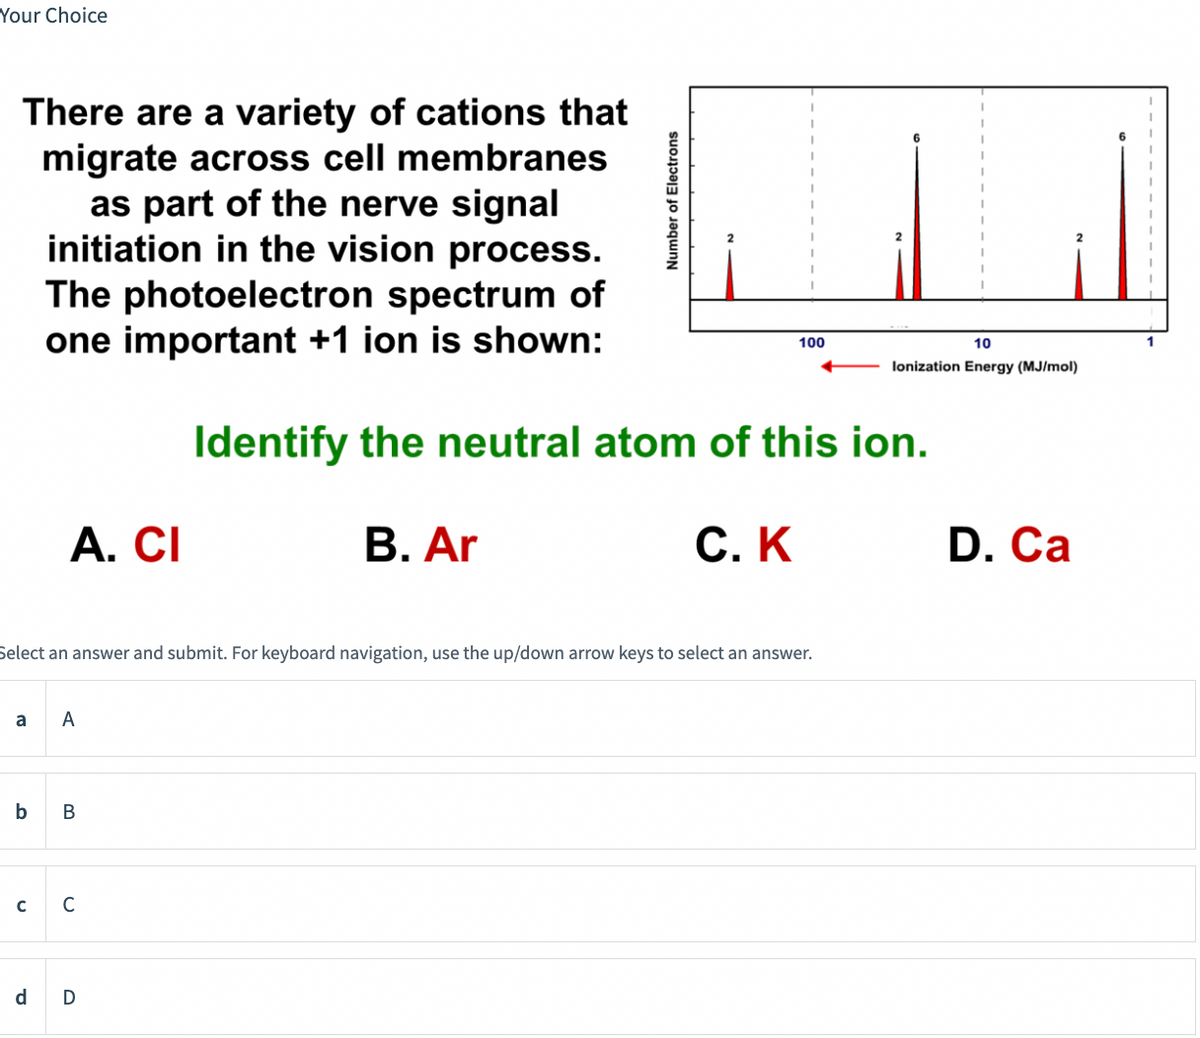 Your Choice
There are a variety of cations that
migrate across cell membranes
as part of the nerve signal
initiation in the vision process.
The photoelectron spectrum of
one important +1 ion is shown:
a
A. CI
с
Select an answer and submit. For keyboard navigation, use the up/down arrow keys to select an answer.
A
b B
C
Number of Electrons
d D
100
10
lonization Energy (MJ/mol)
Identify the neutral atom of this ion.
B. Ar
C. K
D. Ca